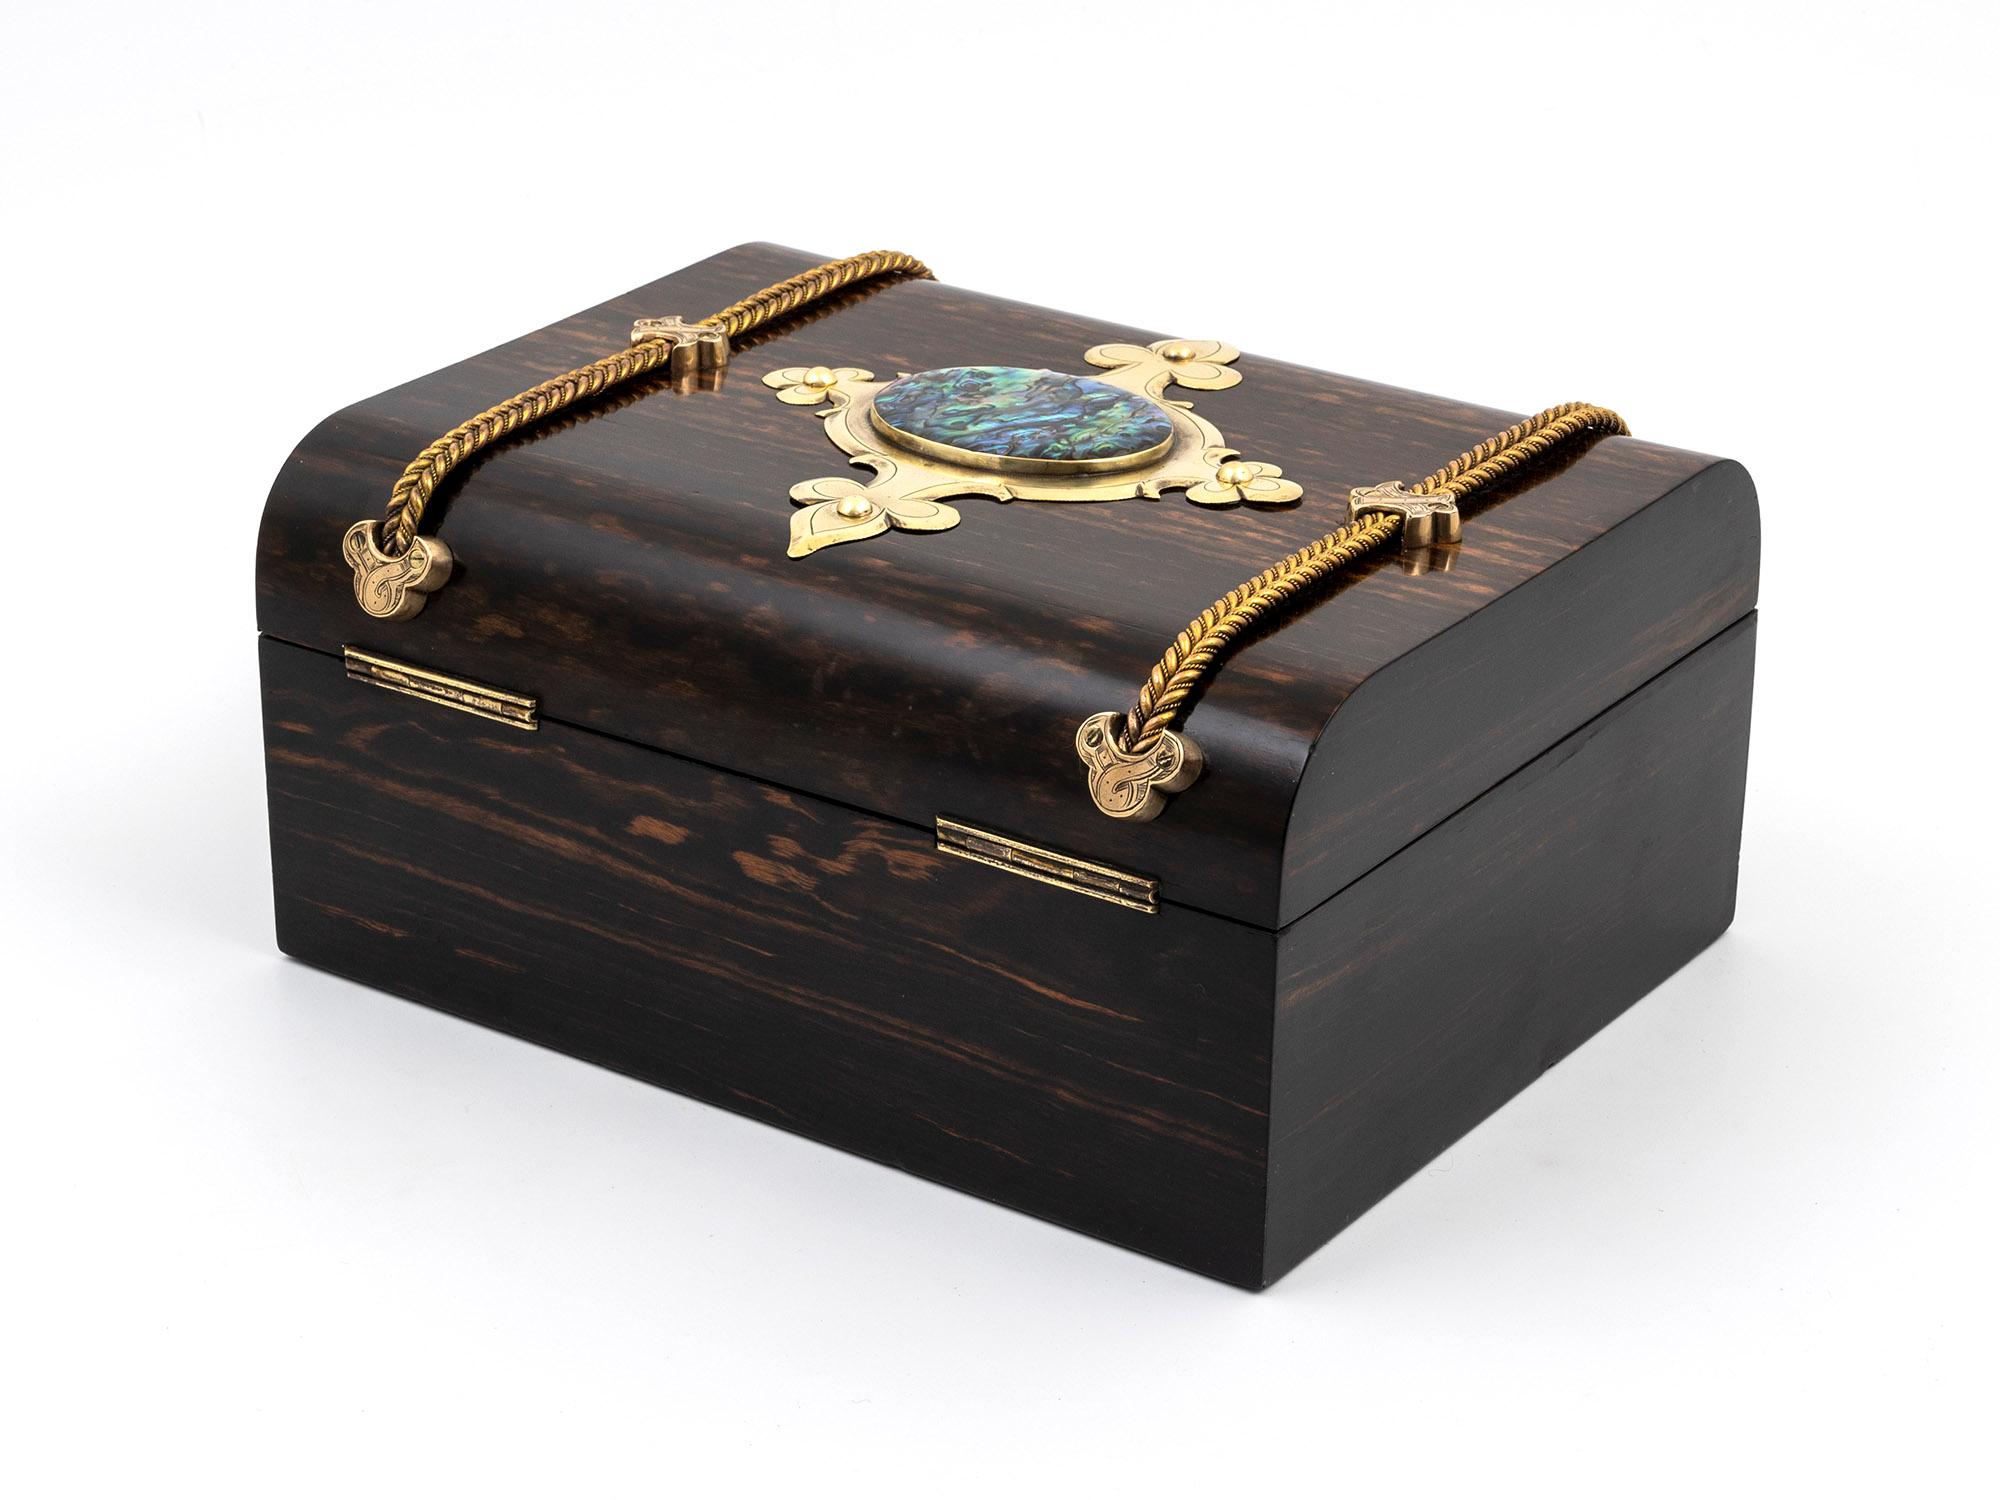 Hand-Crafted 19th Century Antique Dome-Top Jewellery Box with Abalone Medallion